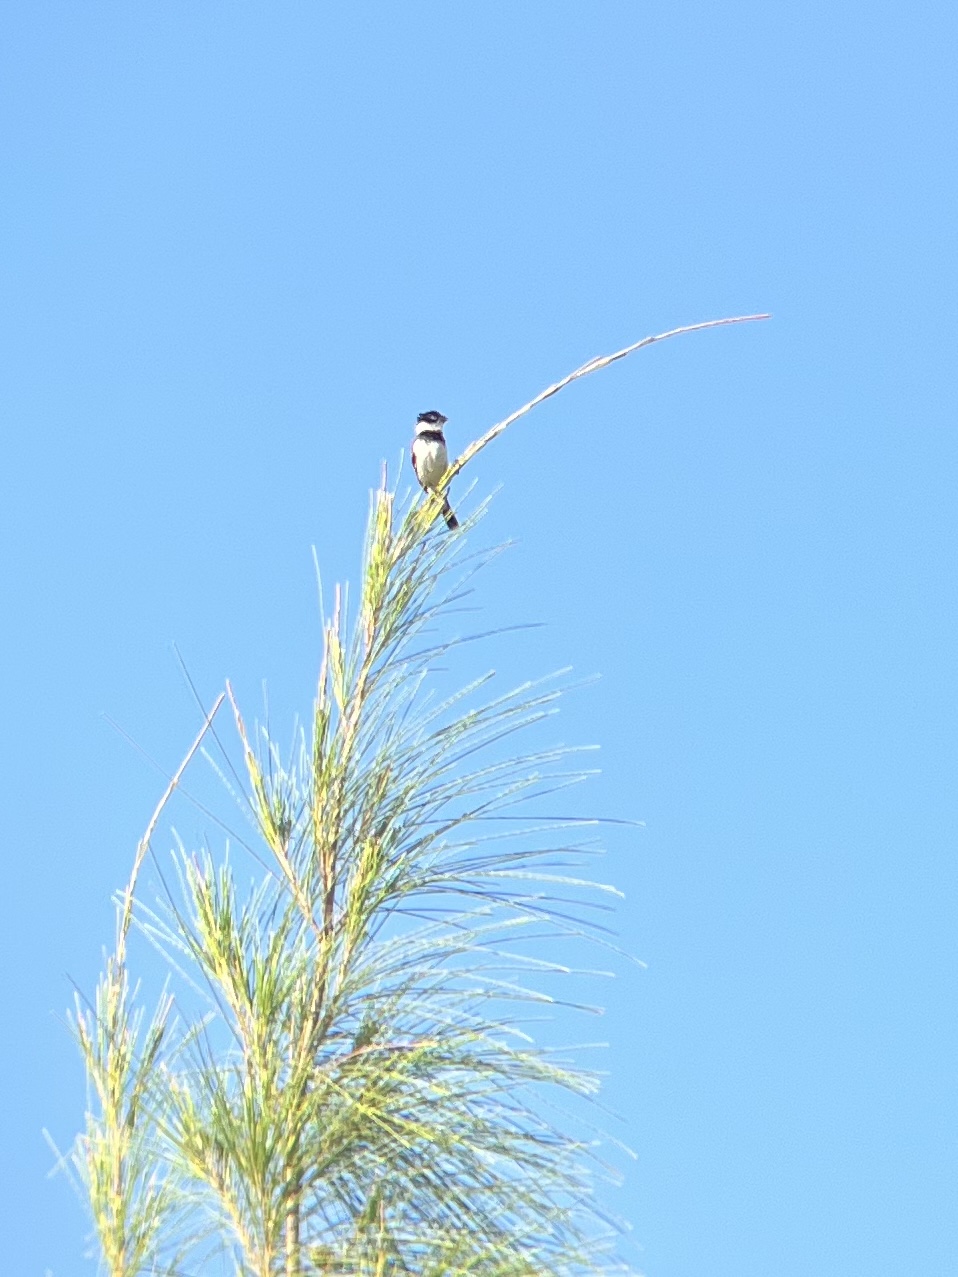 Morelet's Seedeater perched on the bough at the top of the tree